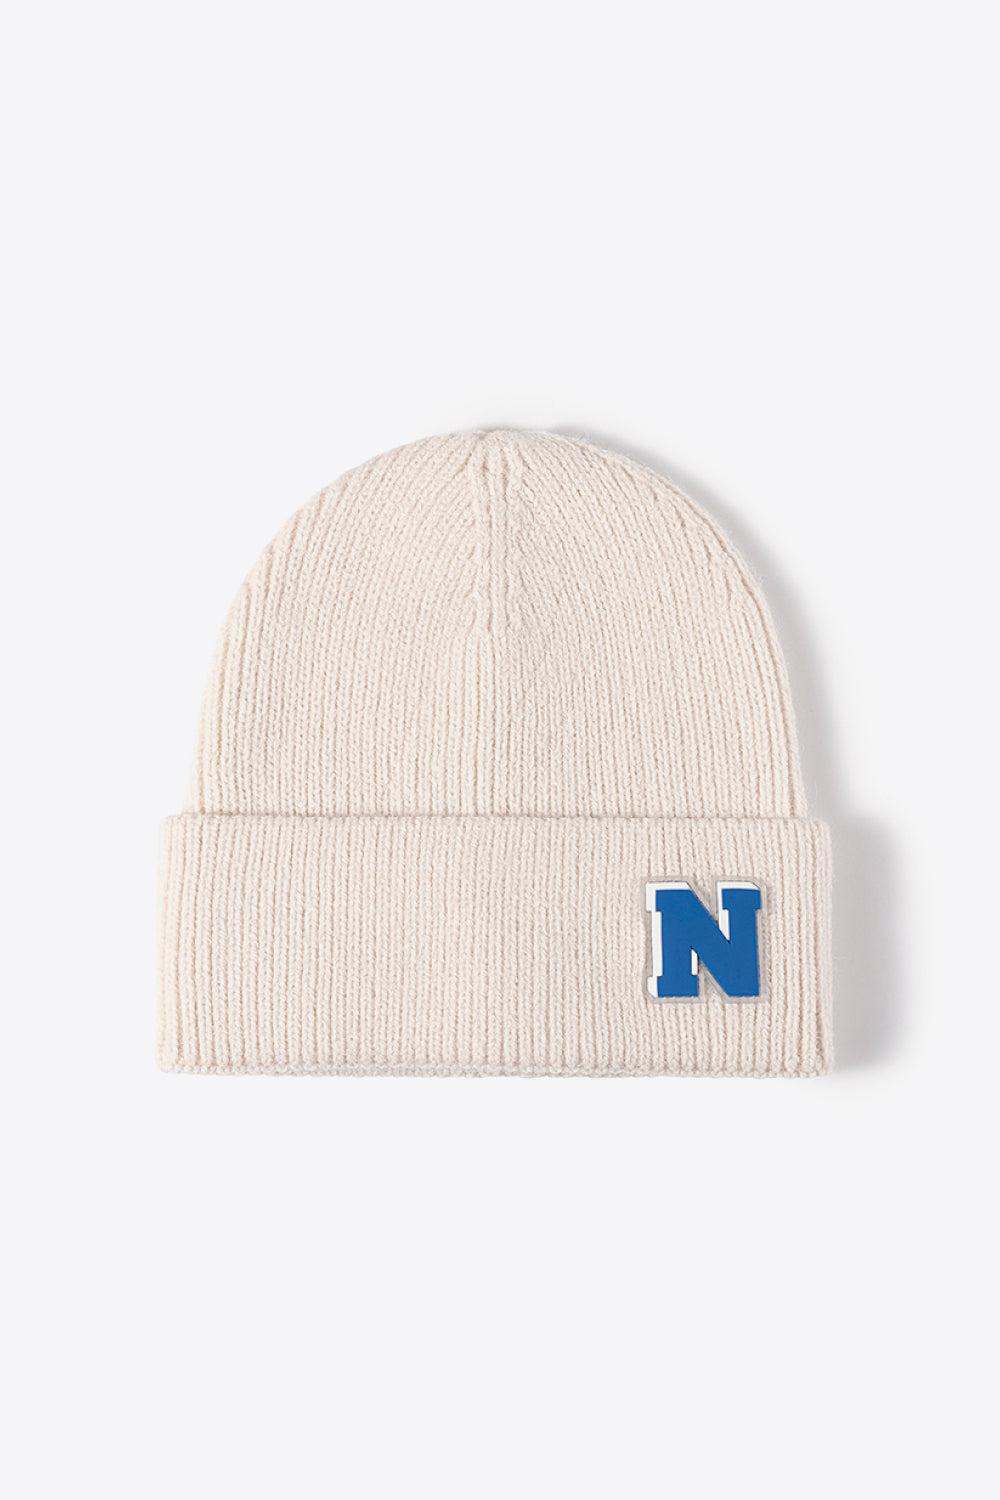 Letter N Patch Cuffed Knit Beanie-[Adult]-[Female]-Beige-One Size-2022 Online Blue Zone Planet